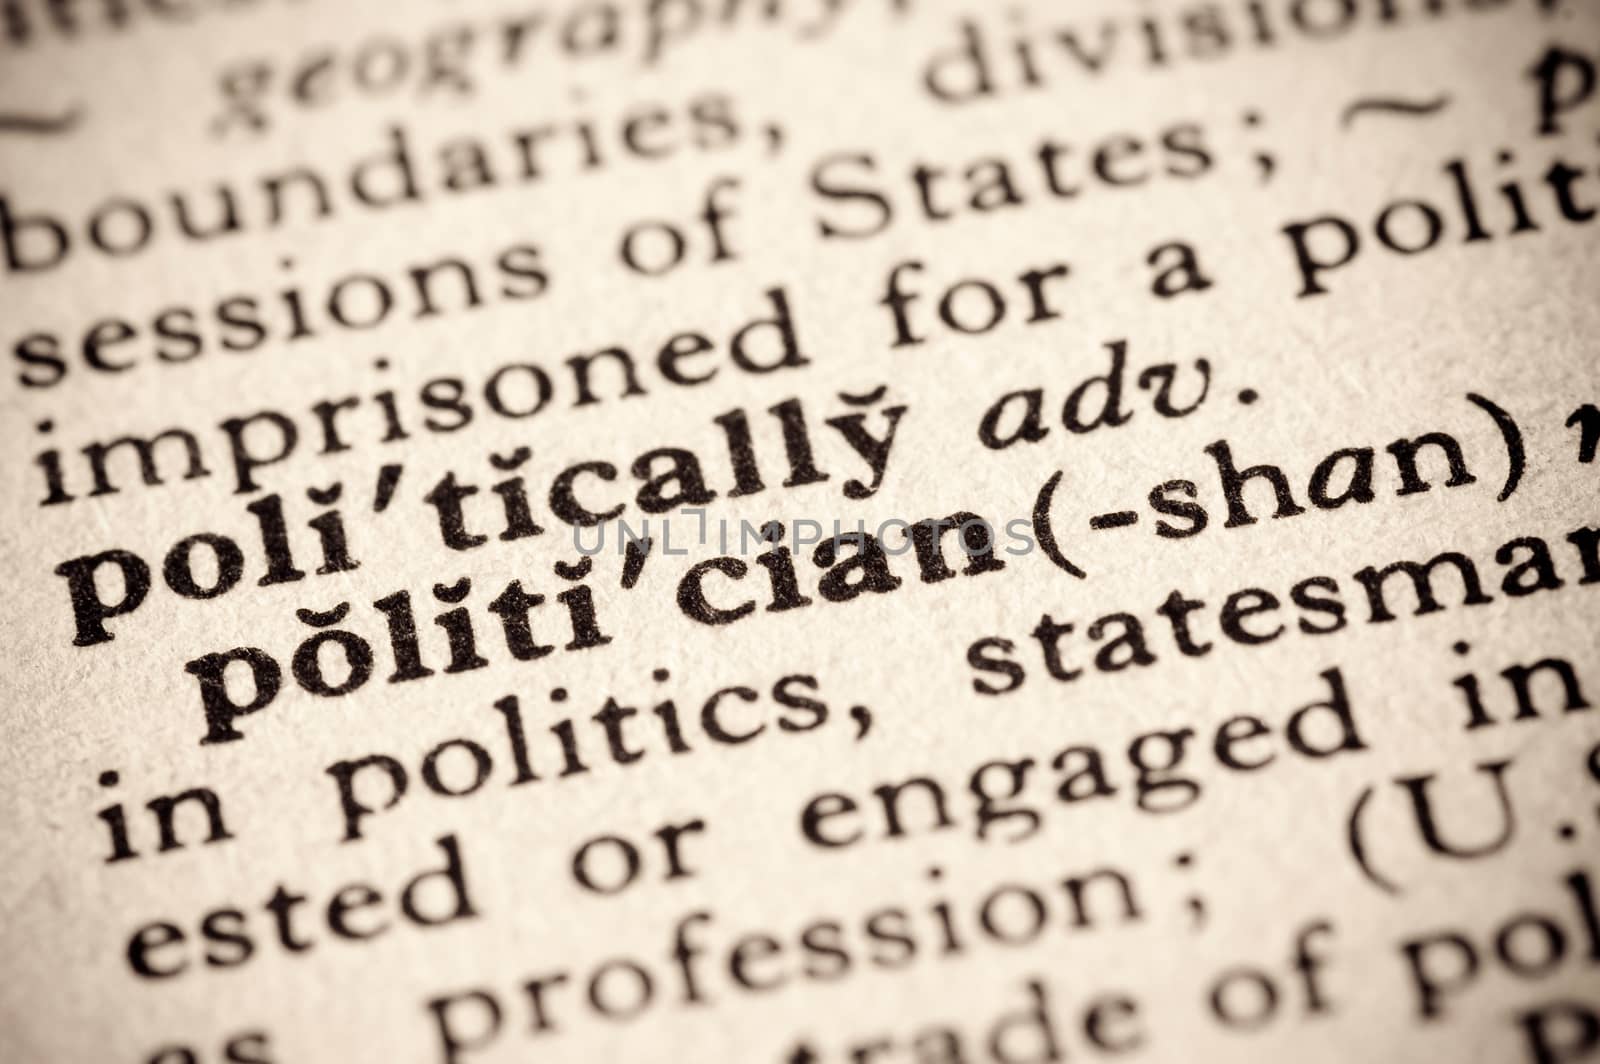 faded dictionary definition of the word politician